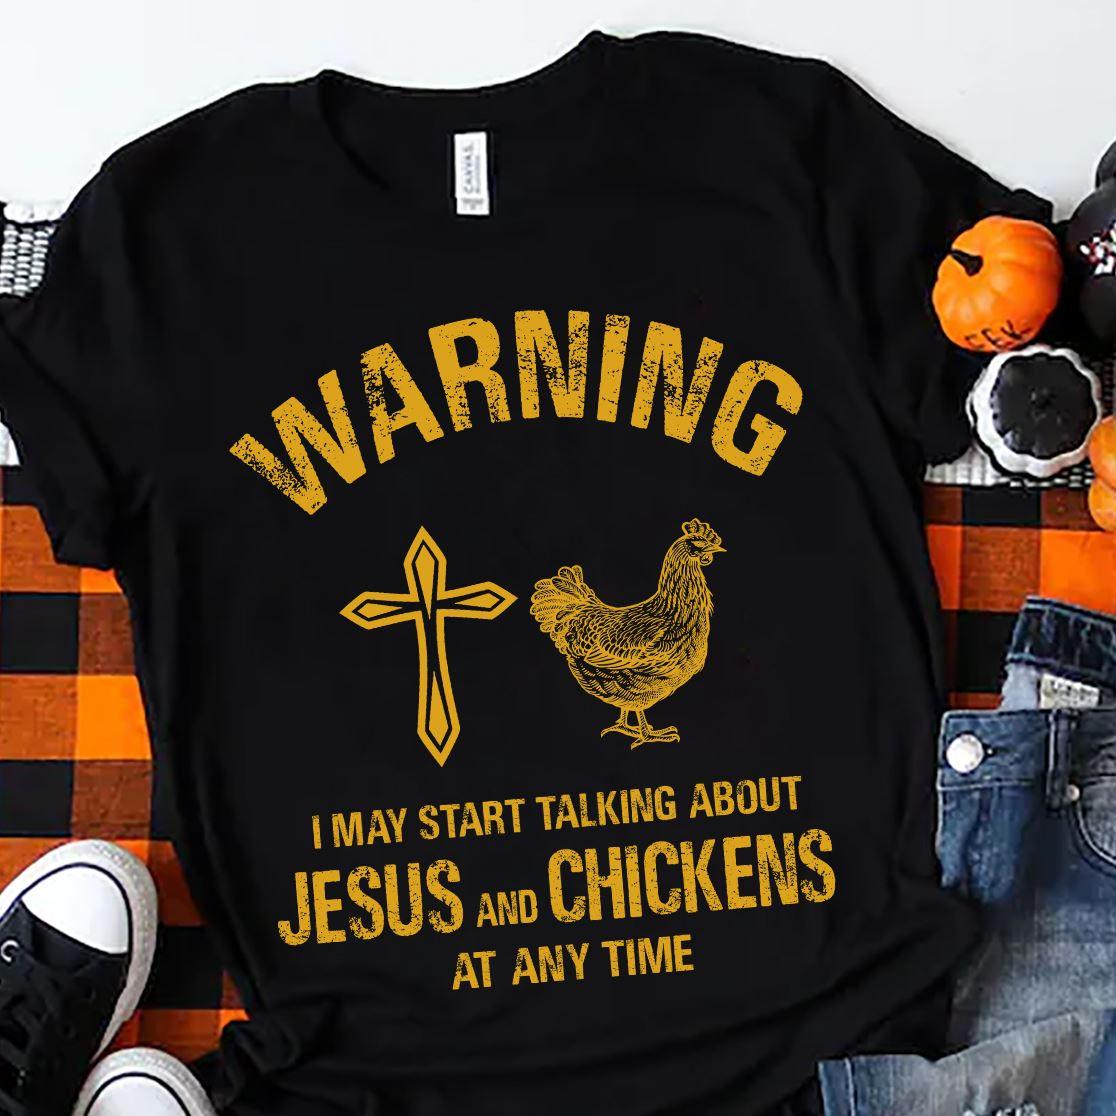 Warning I may start talking about Jesus and chickens at any time - Believe in Jesus, chicken and God cross